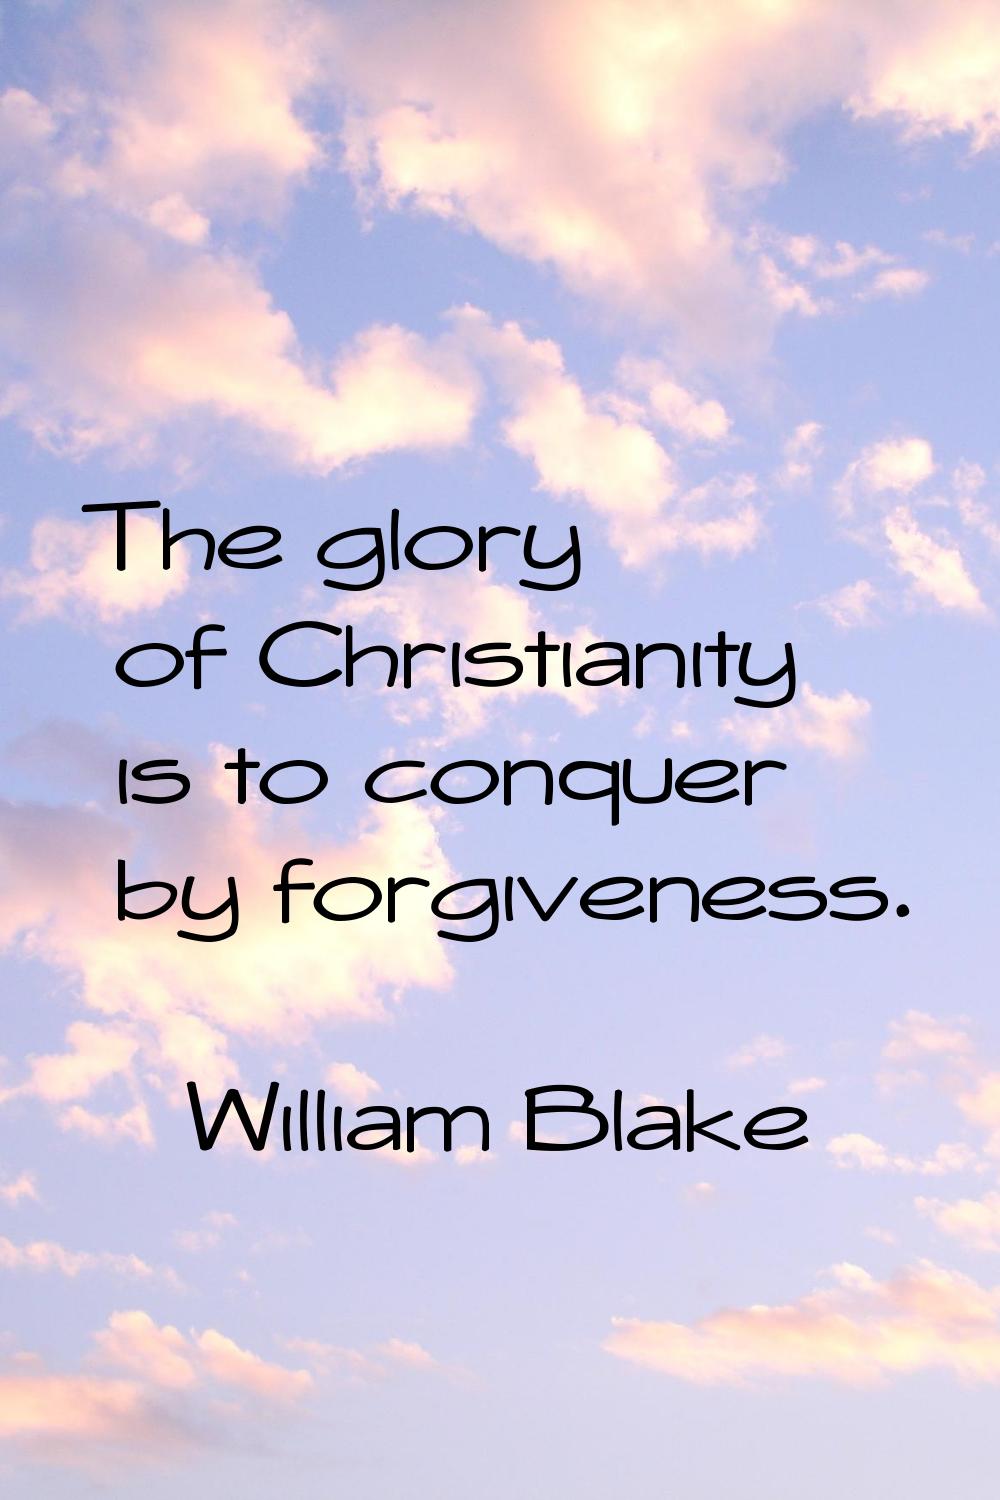 The glory of Christianity is to conquer by forgiveness.